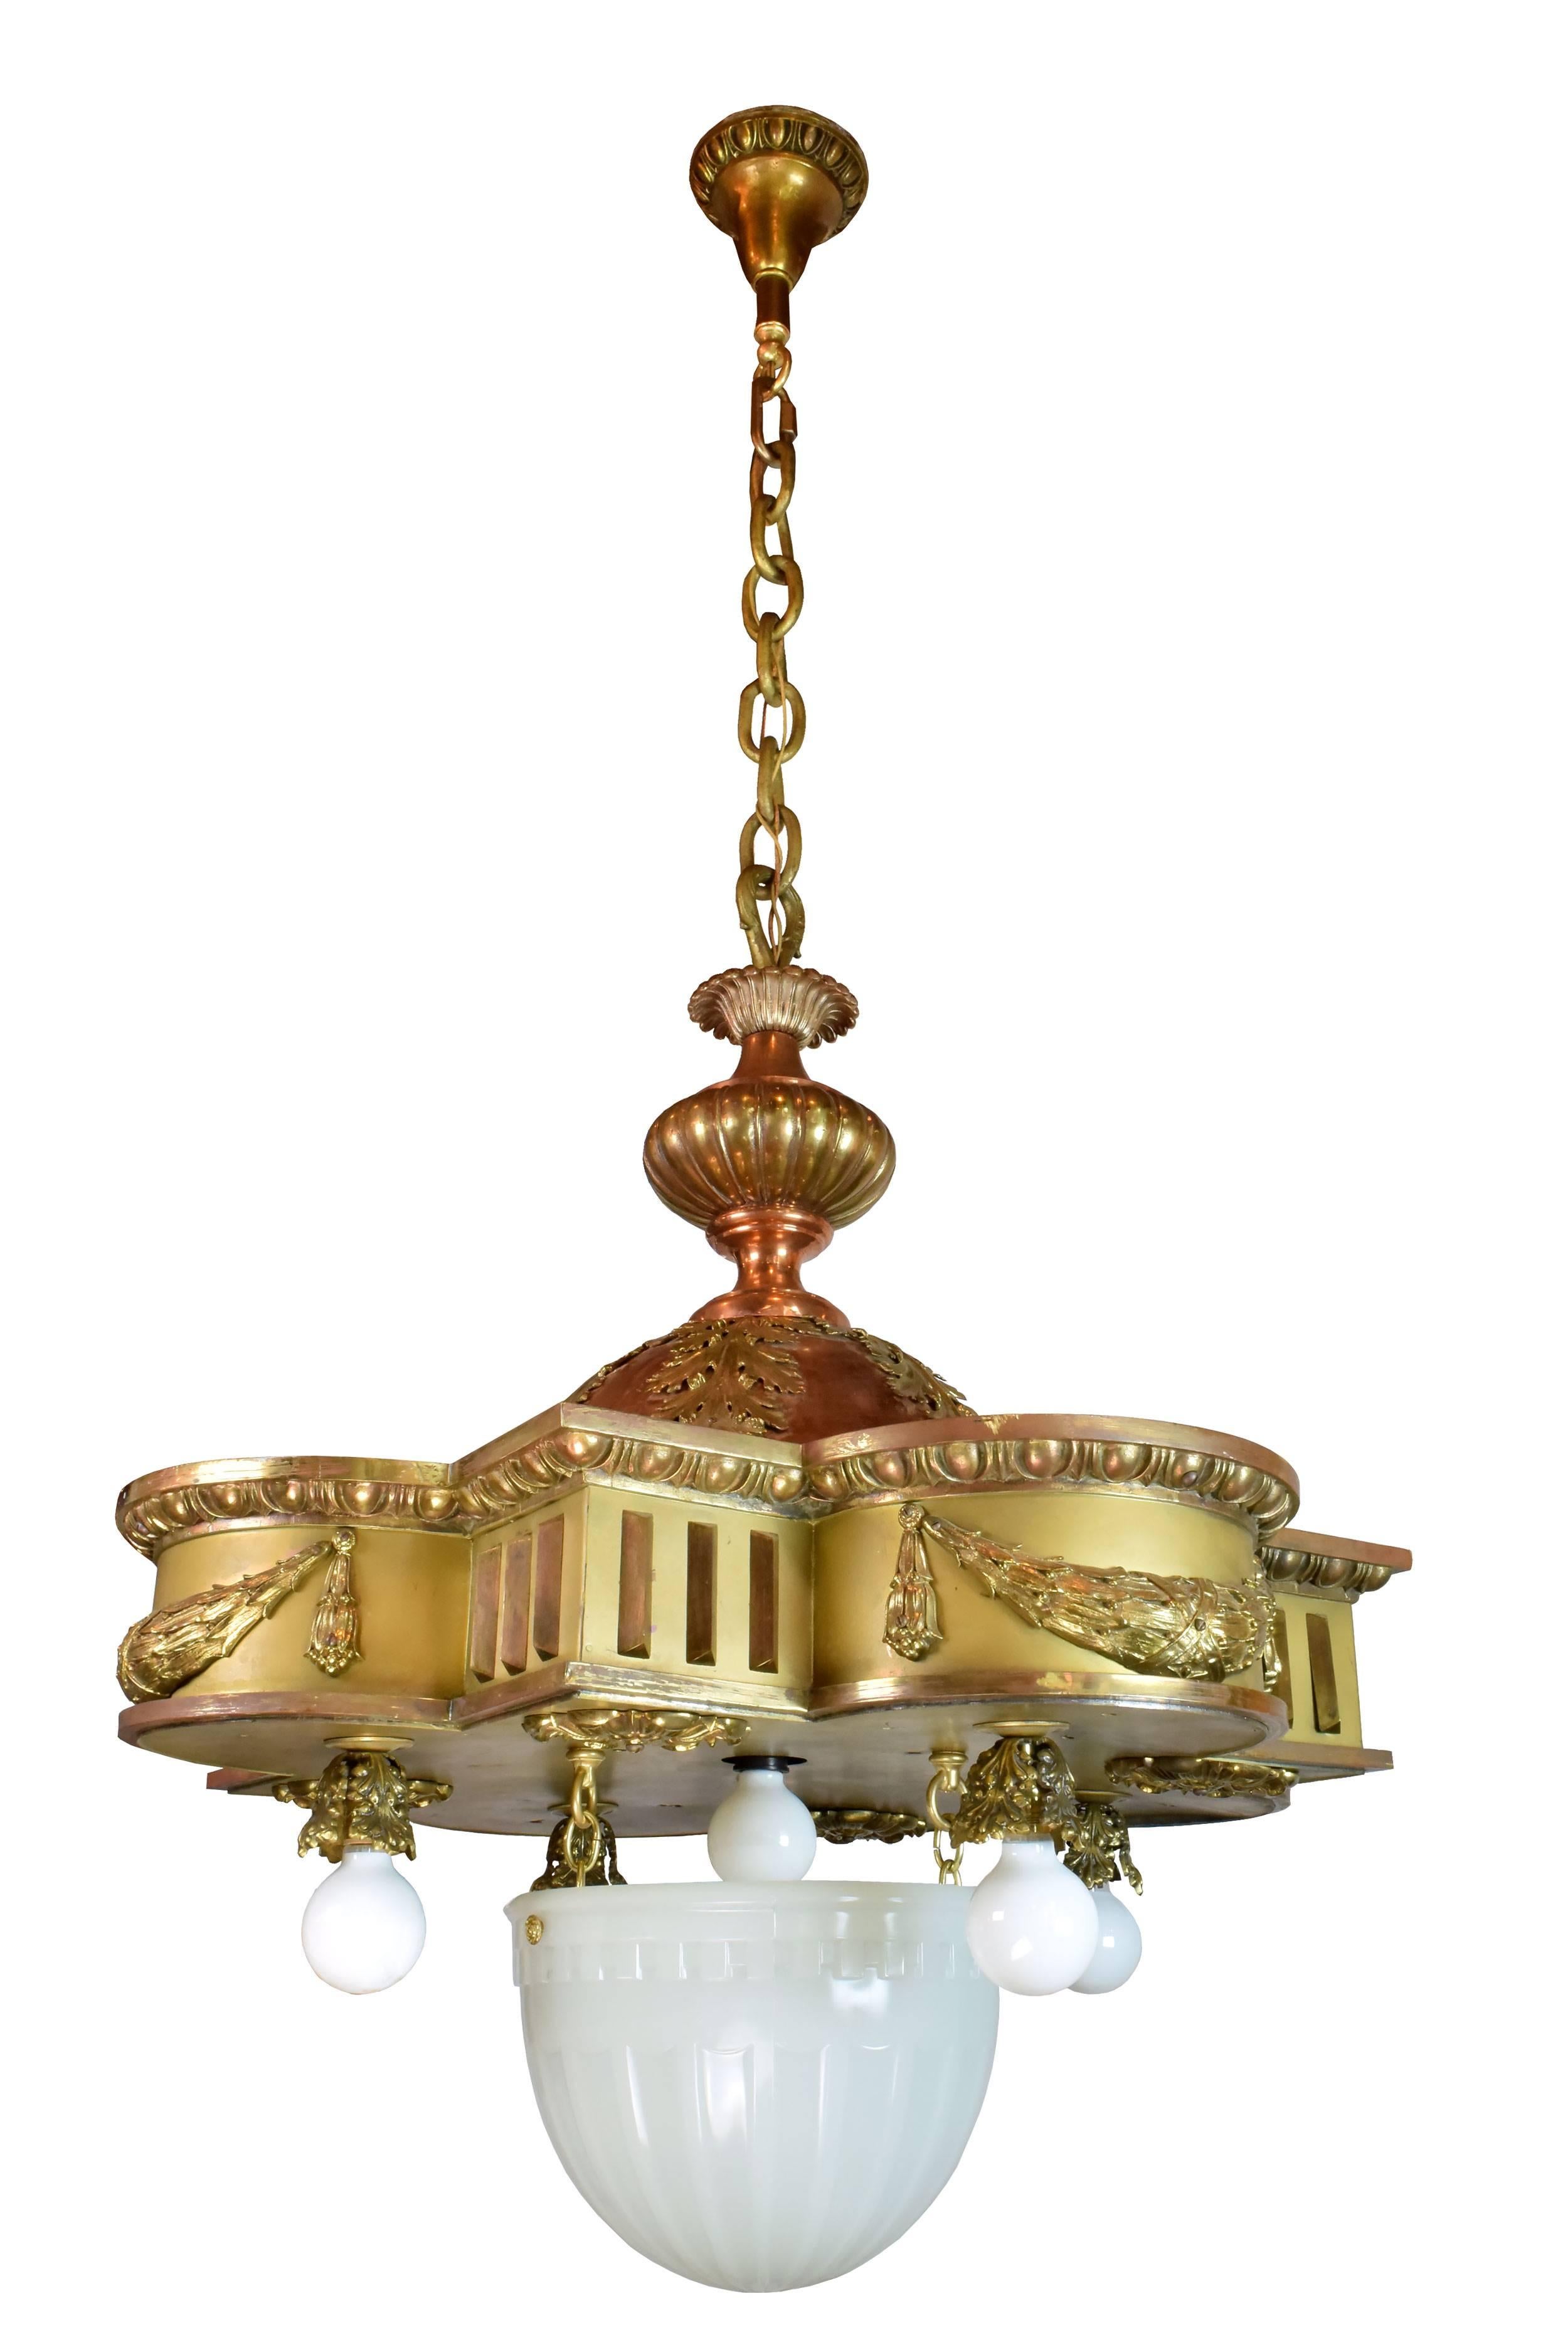 This gorgeous copper and brass theater light features a dazzling barbed quatrefoil base, which is adorned with large, ornate leaves and intricate garlands. Four bulbs hang from the bottom, surrounding an elegant ribbed bowl in the center. A thick,